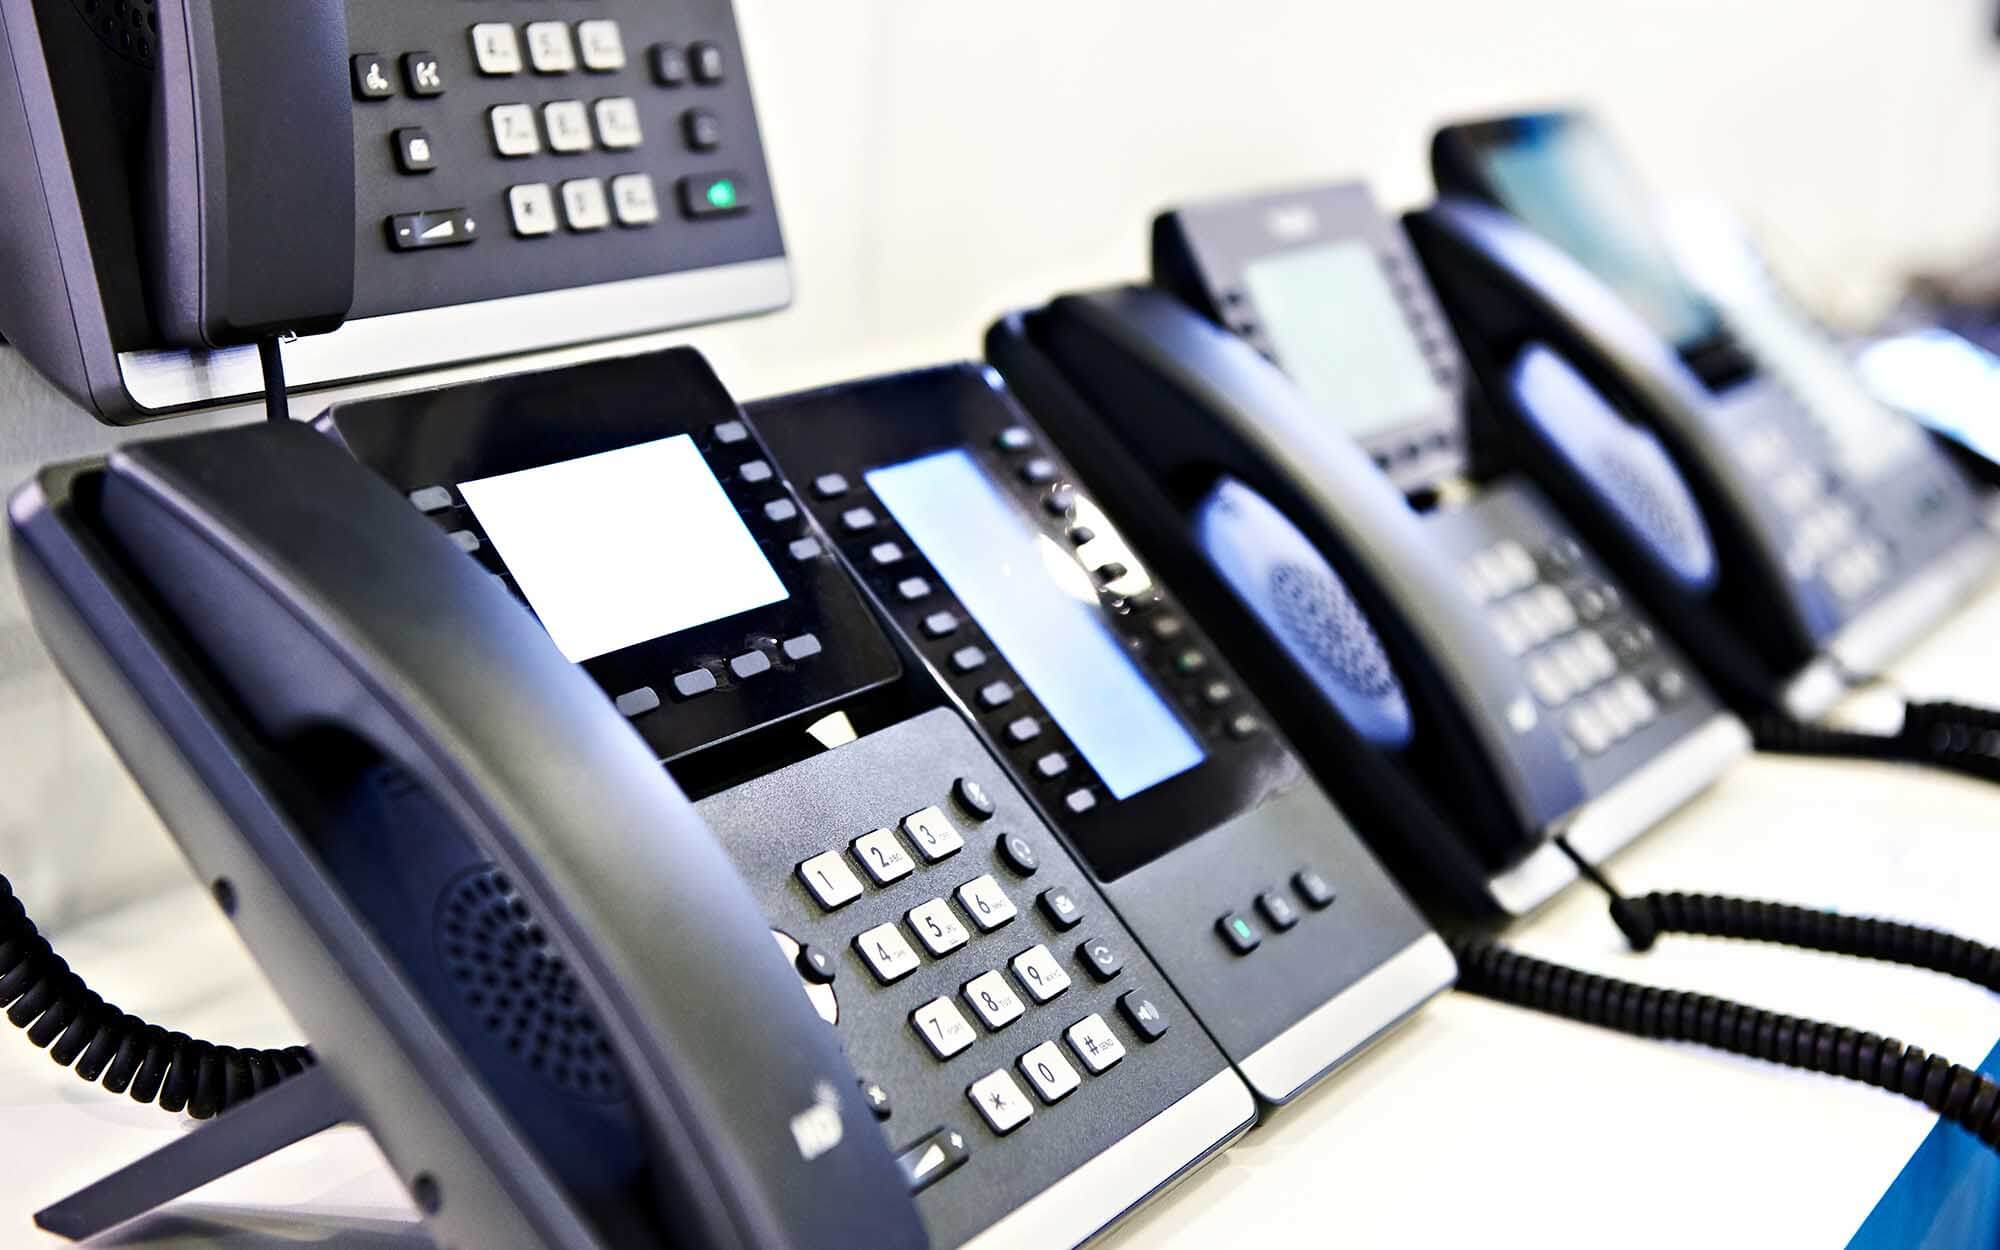 unified communications solutions